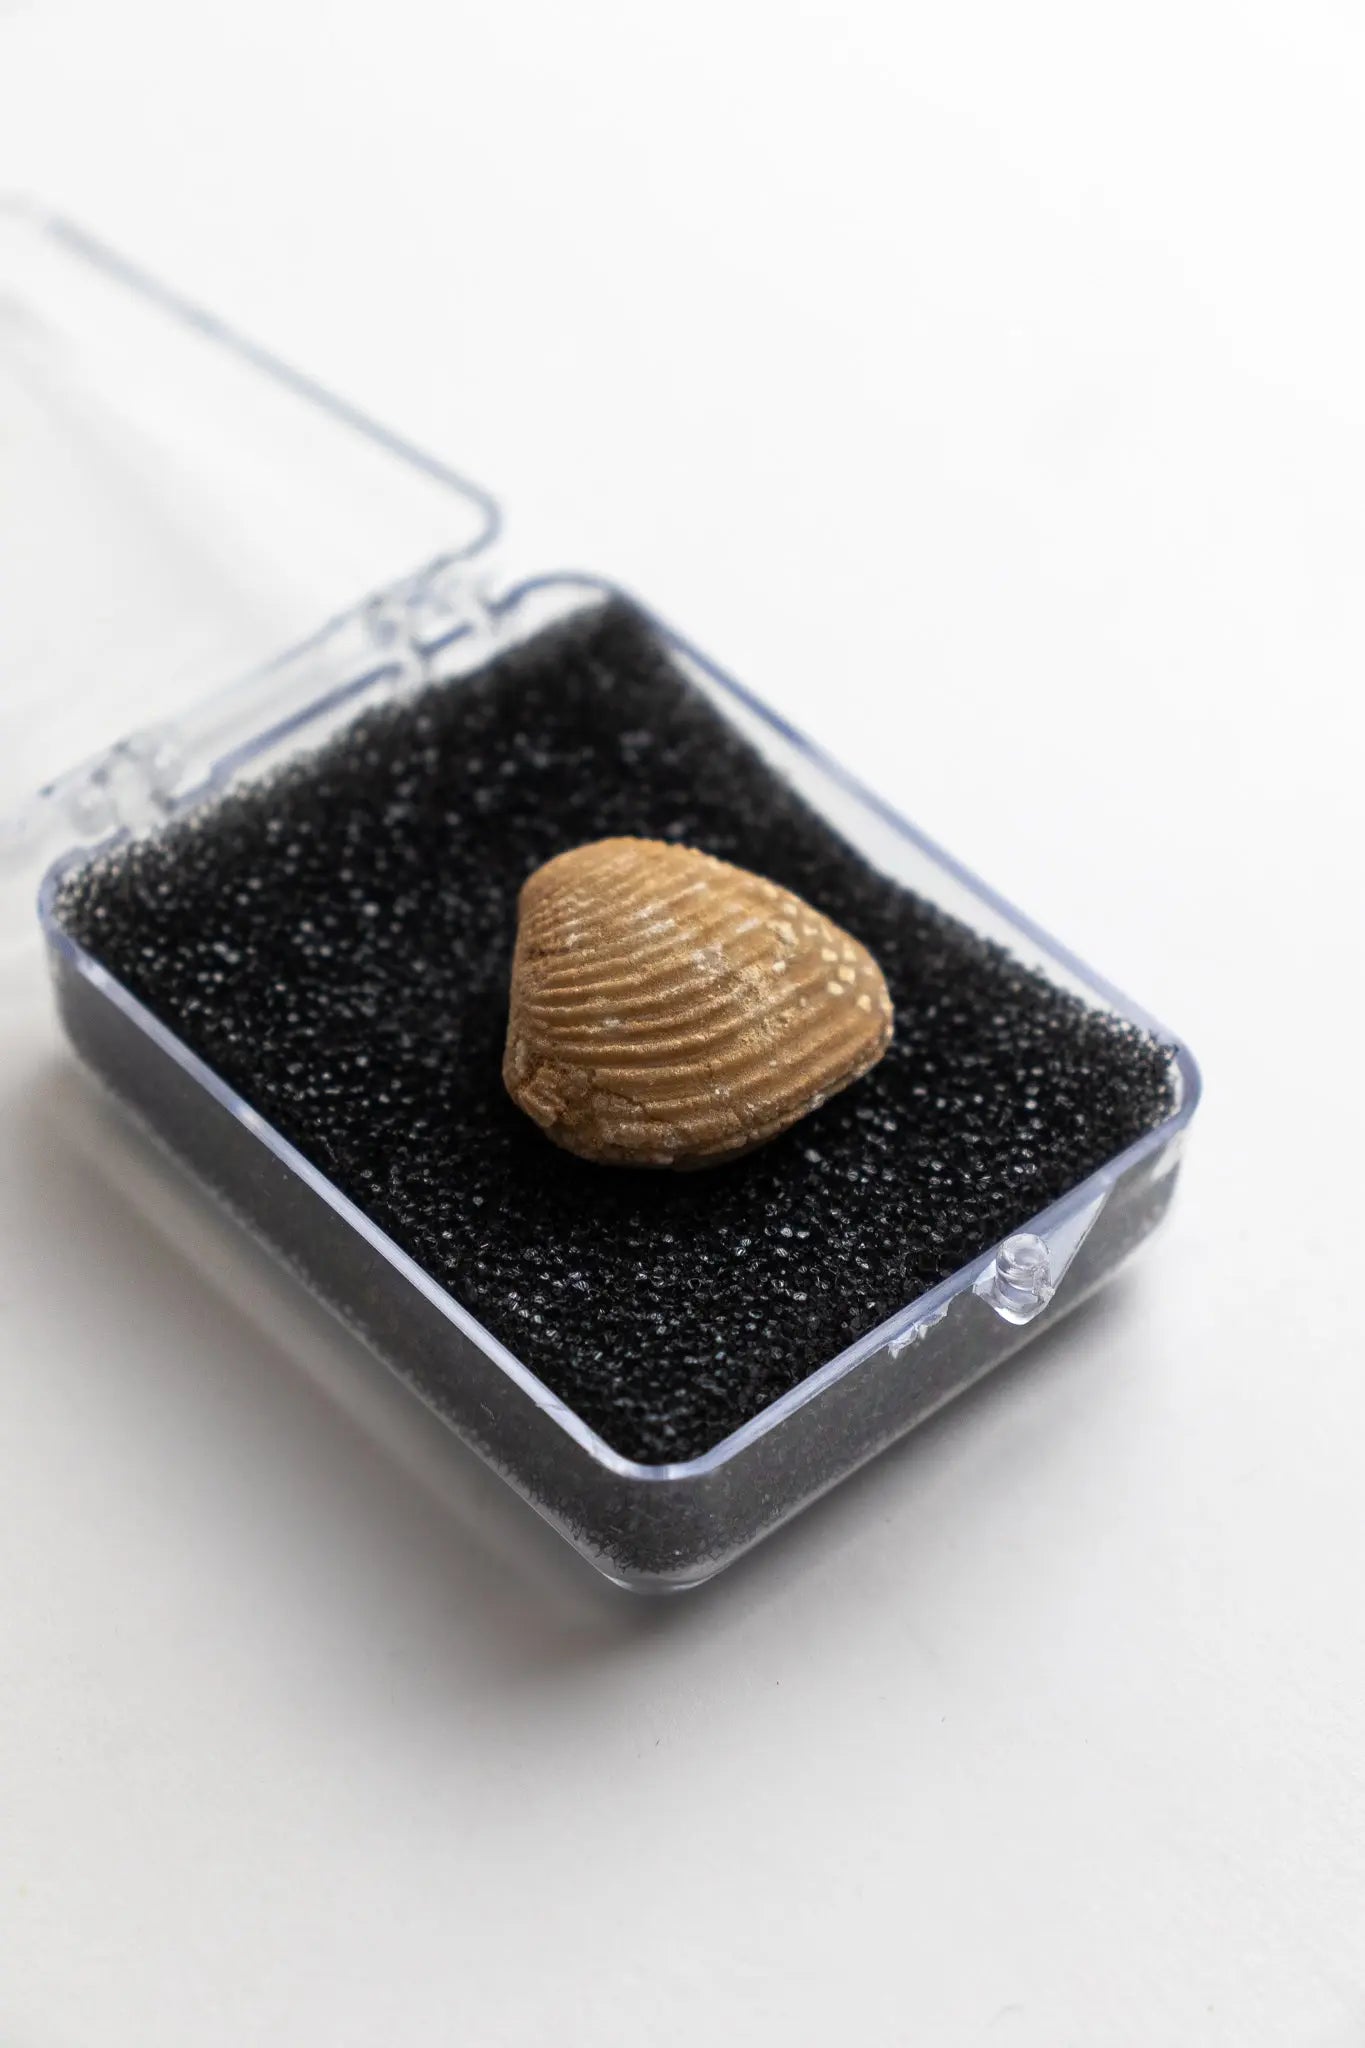 Clam Fossil - Stemcell Science Shop